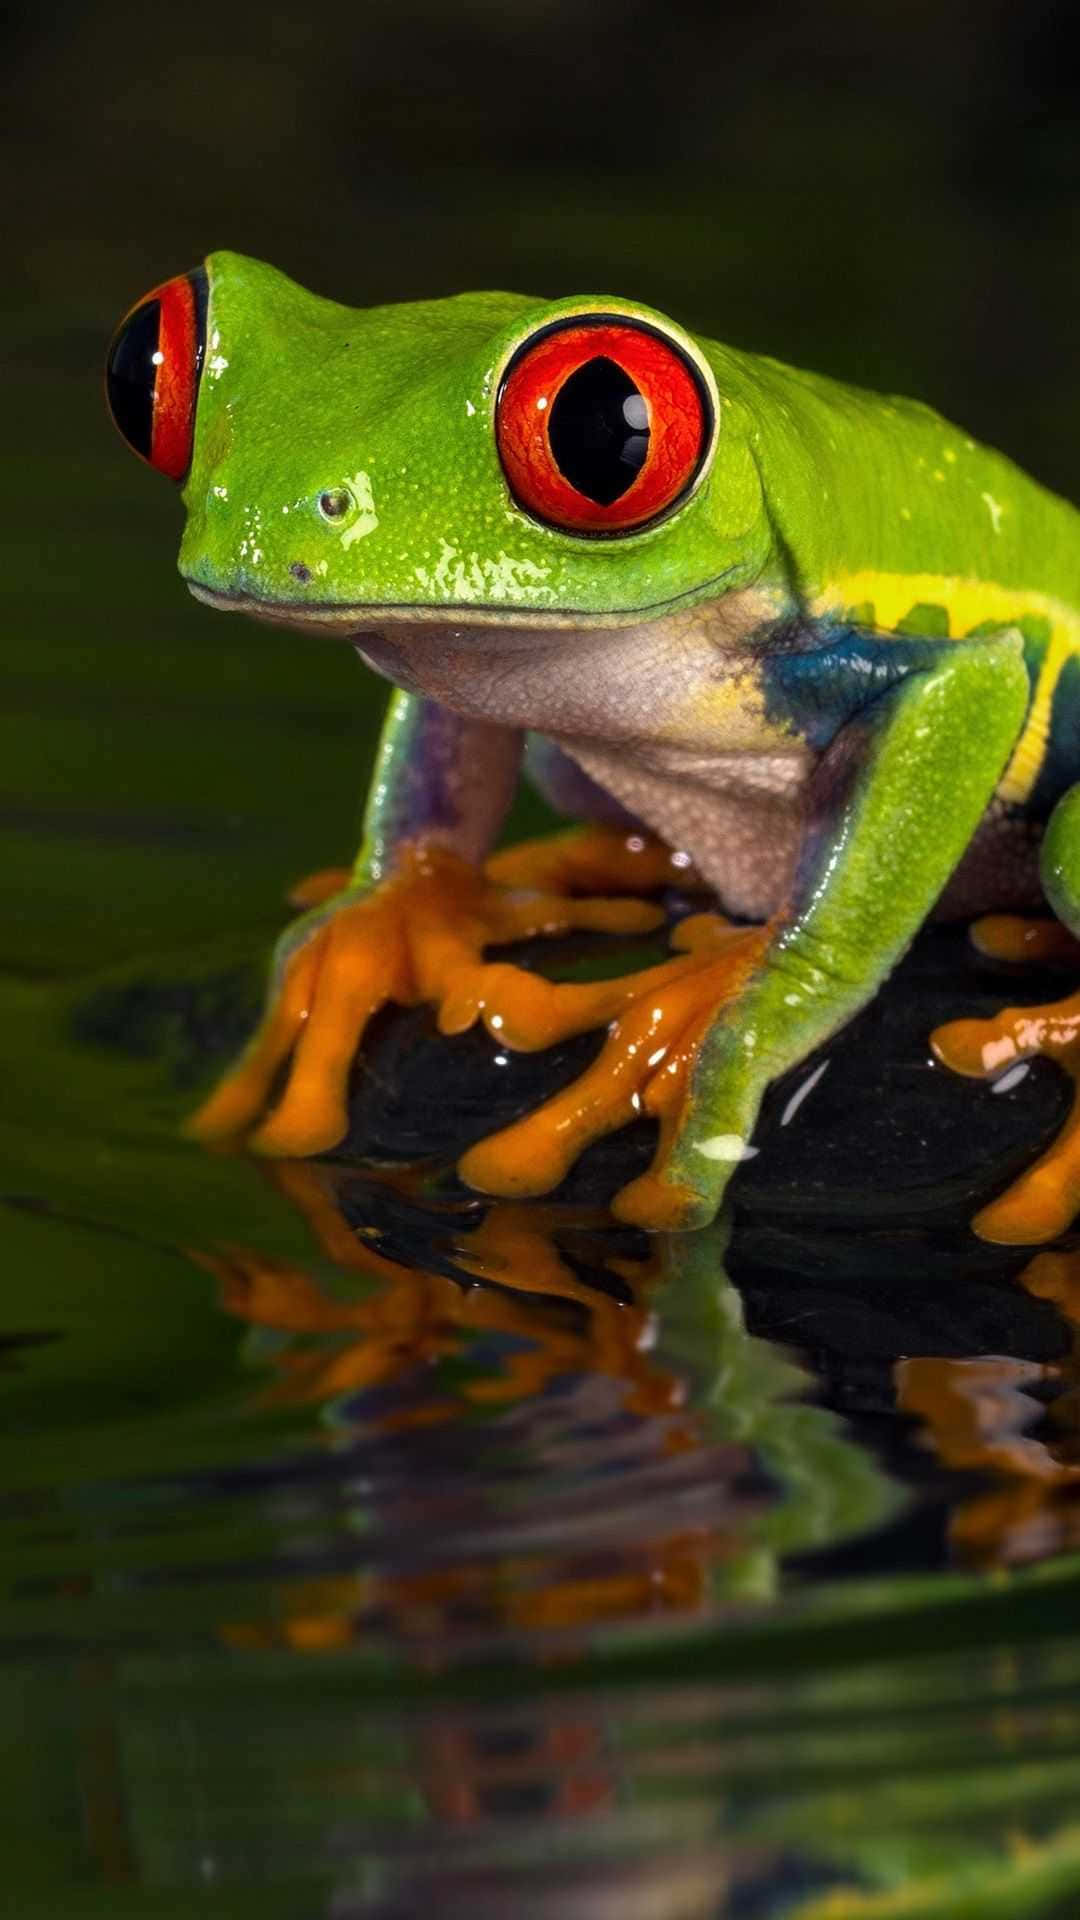 “A fun-loving sight of a happy little frog enjoying the natural surroundings.”